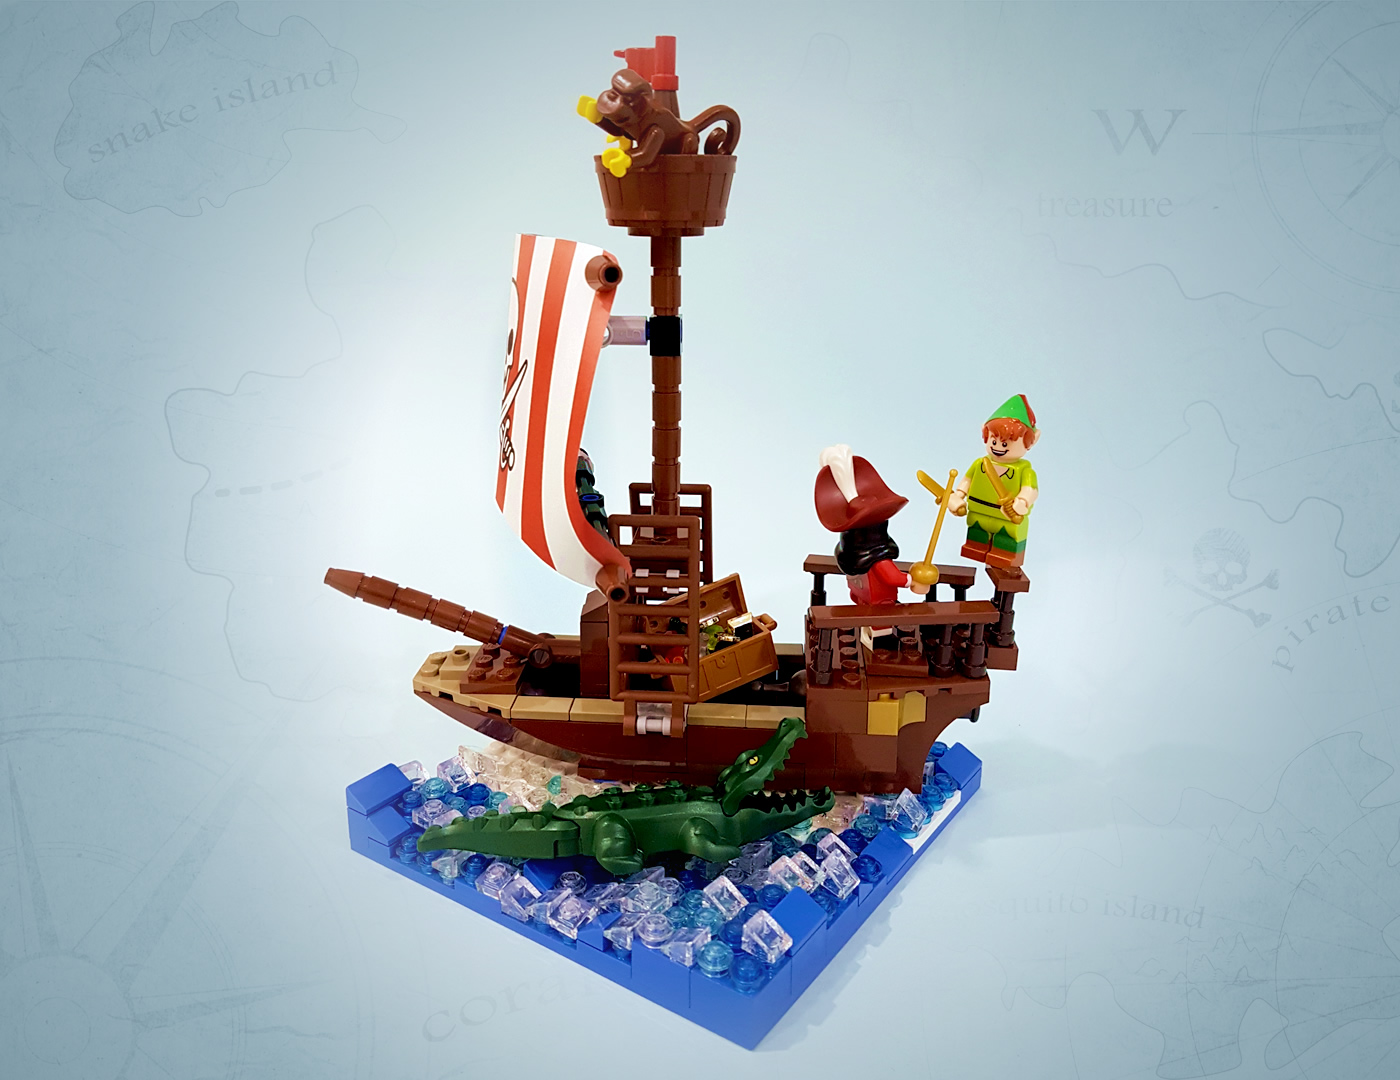 Peter Pan and Captain Hook” by Angela Chung – MOCs – The home of